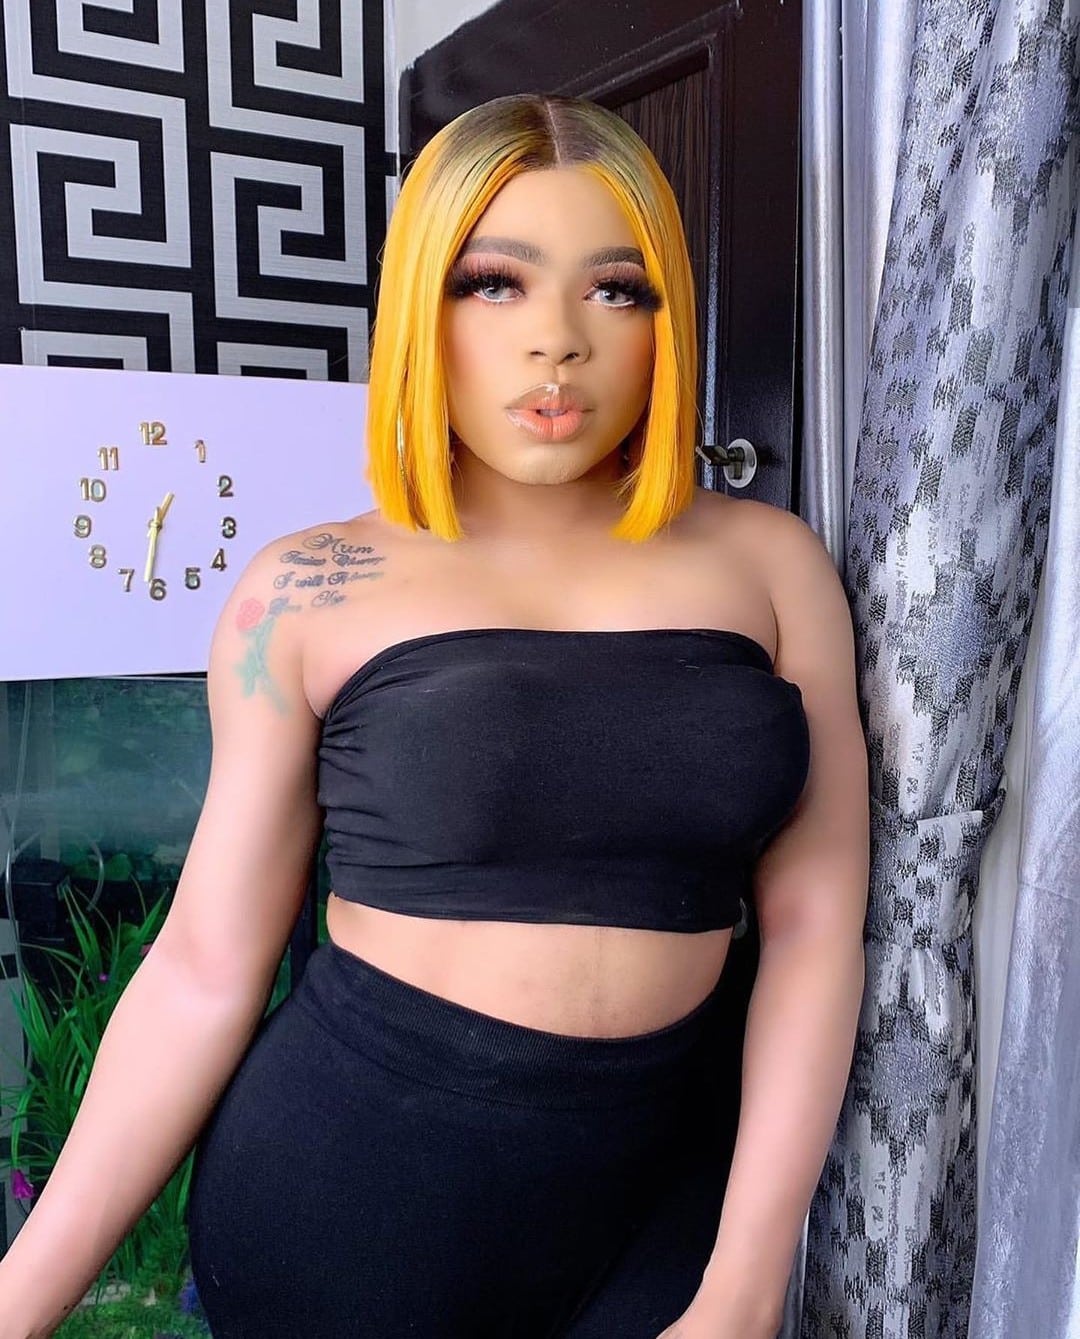 "Don't be so quick to judge me, I have the biggest heart" - Bobrisky writes